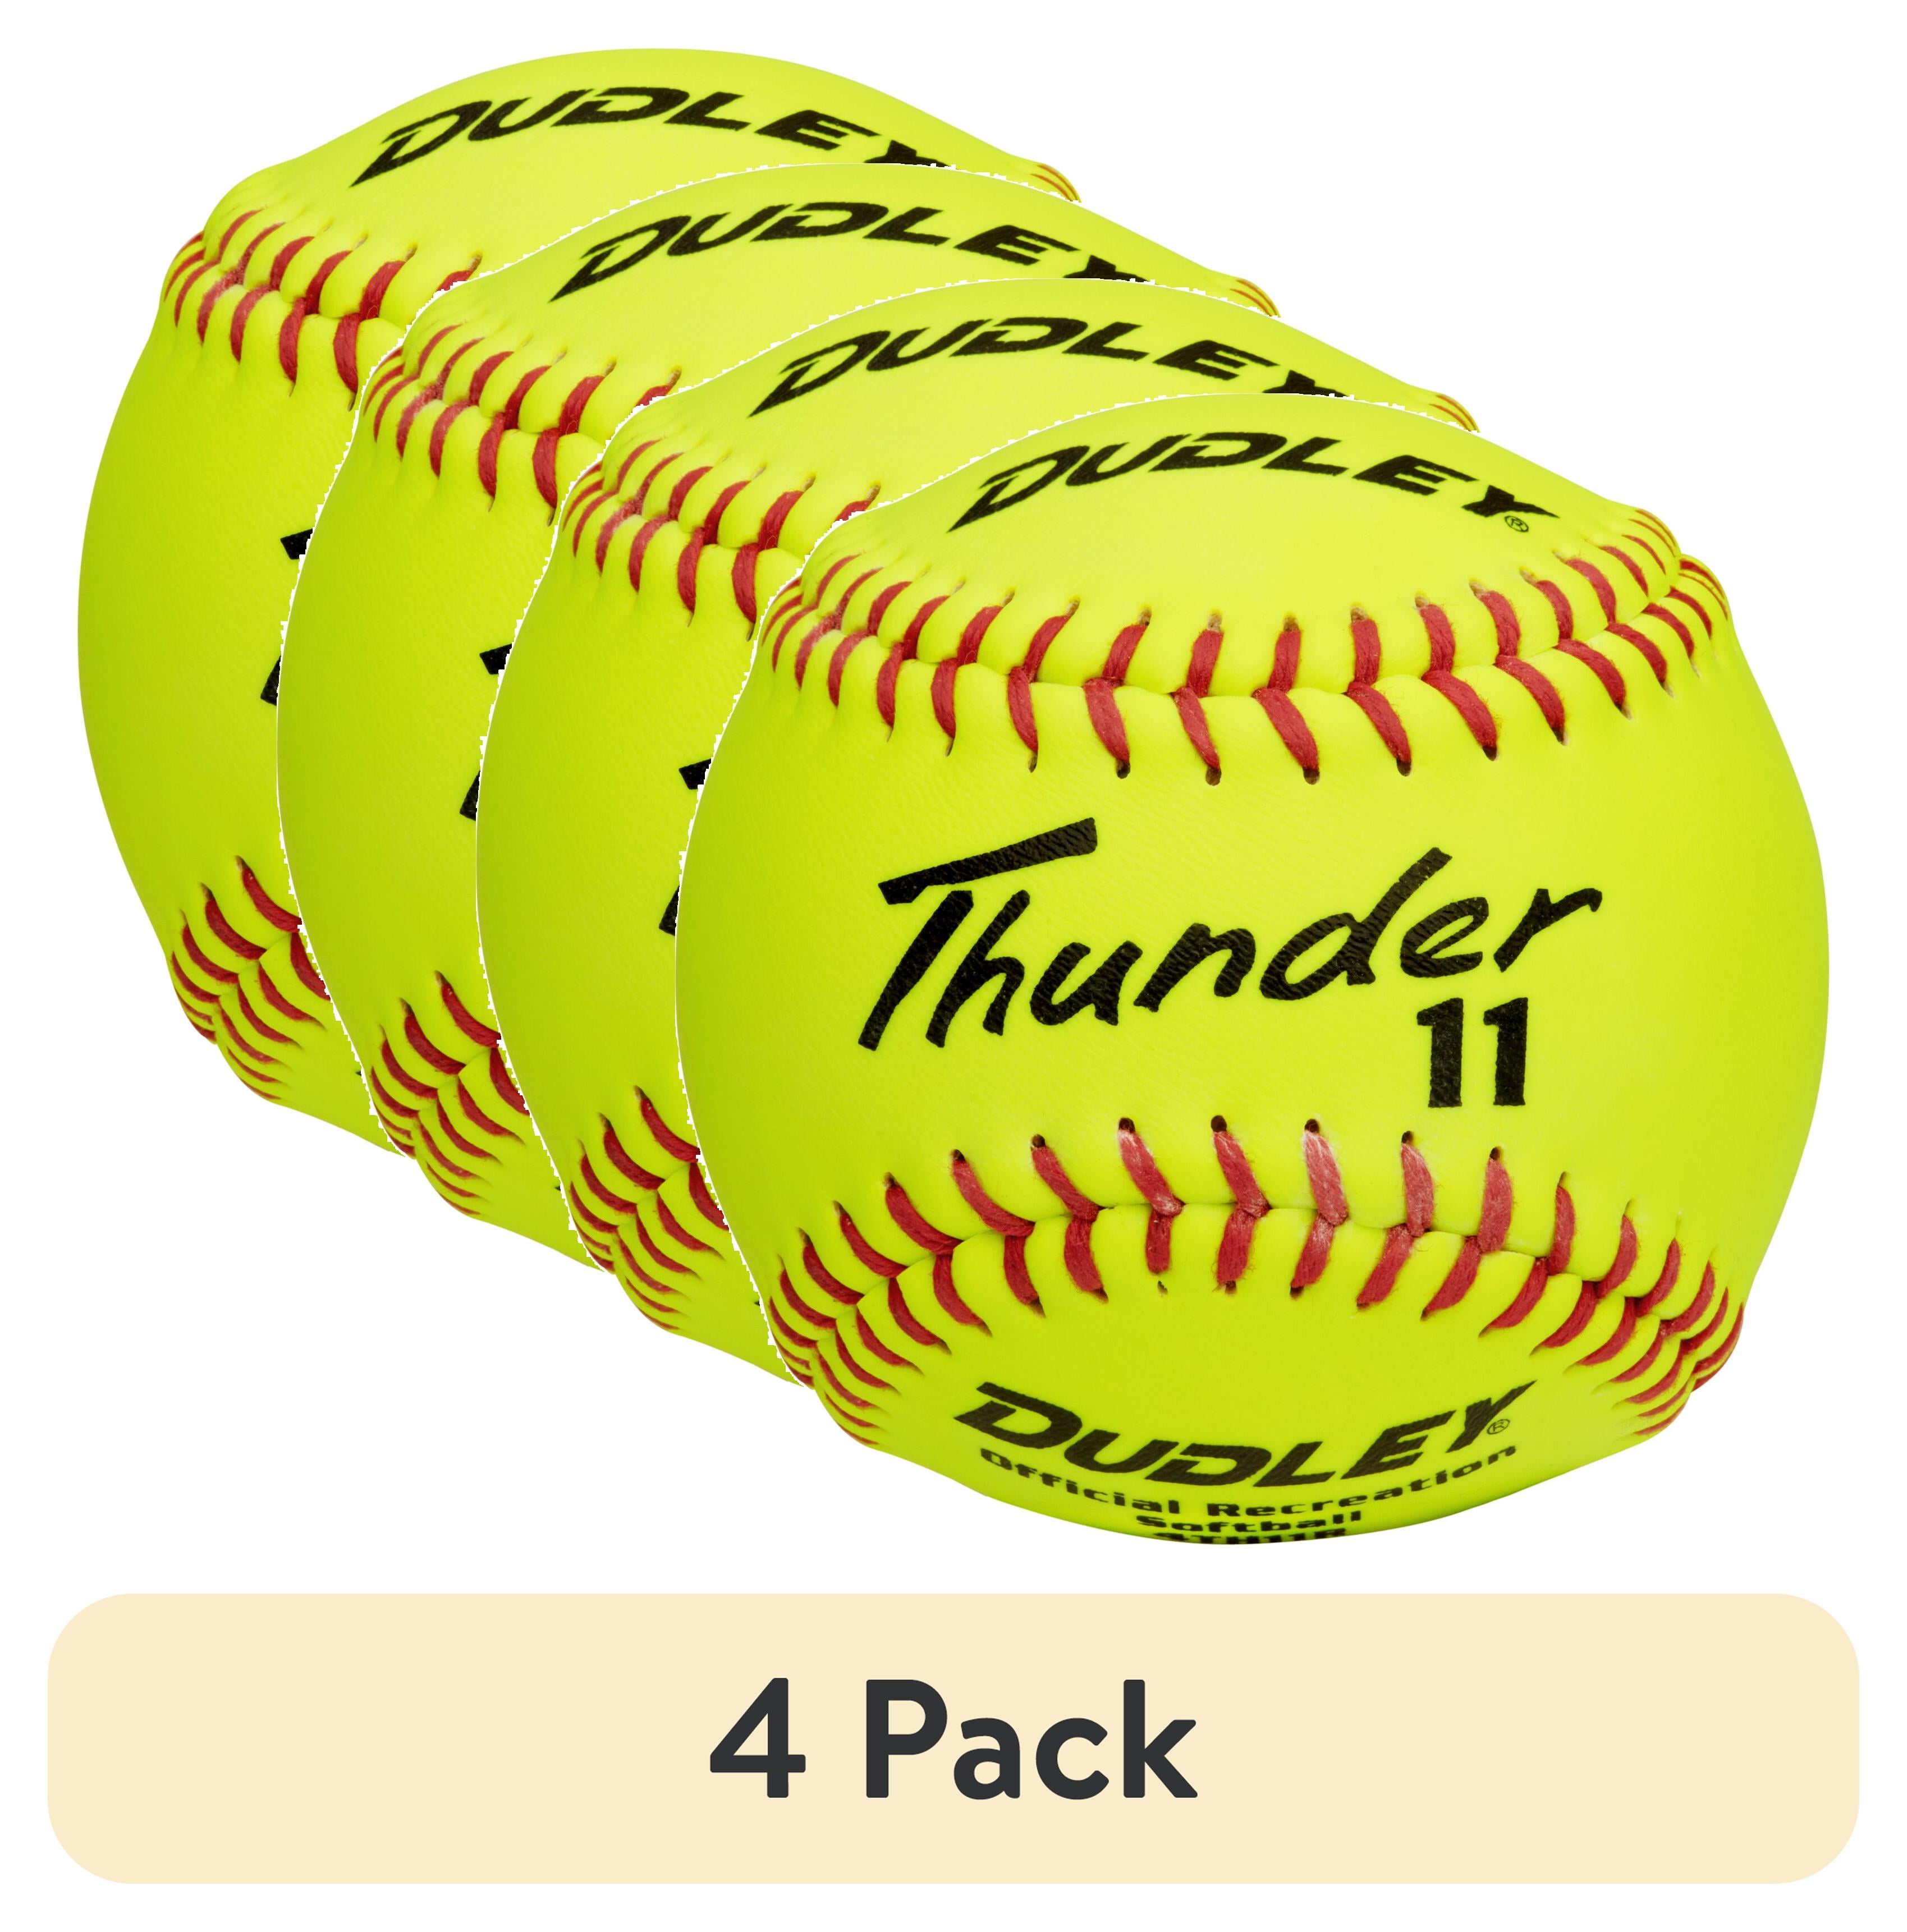 (4 pack) Dudley Thunder 11 Inch Fastpitch Practice Softball 